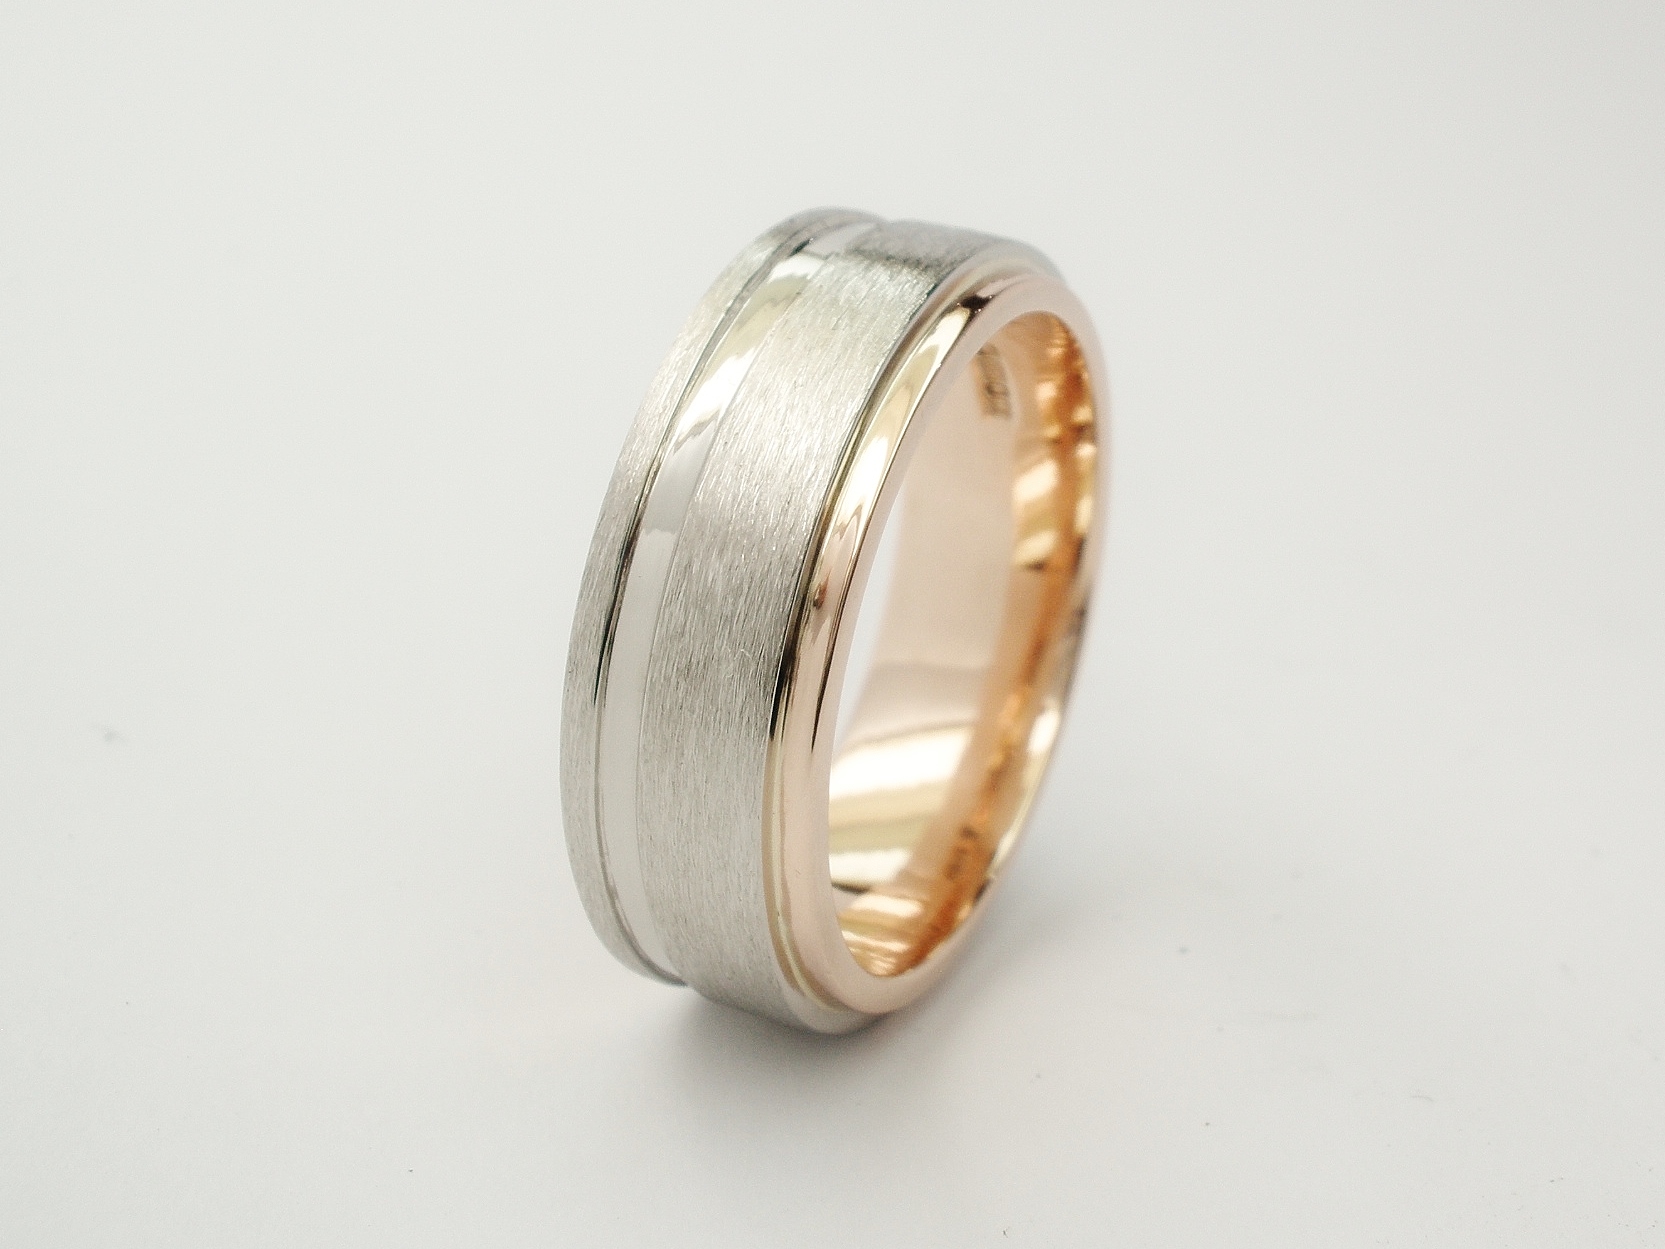 18ct red gold (also known as rose gold or pink gold) gents wedding ring with brushed & polished finish palladium ring overlaid to 80% across red gold ring.